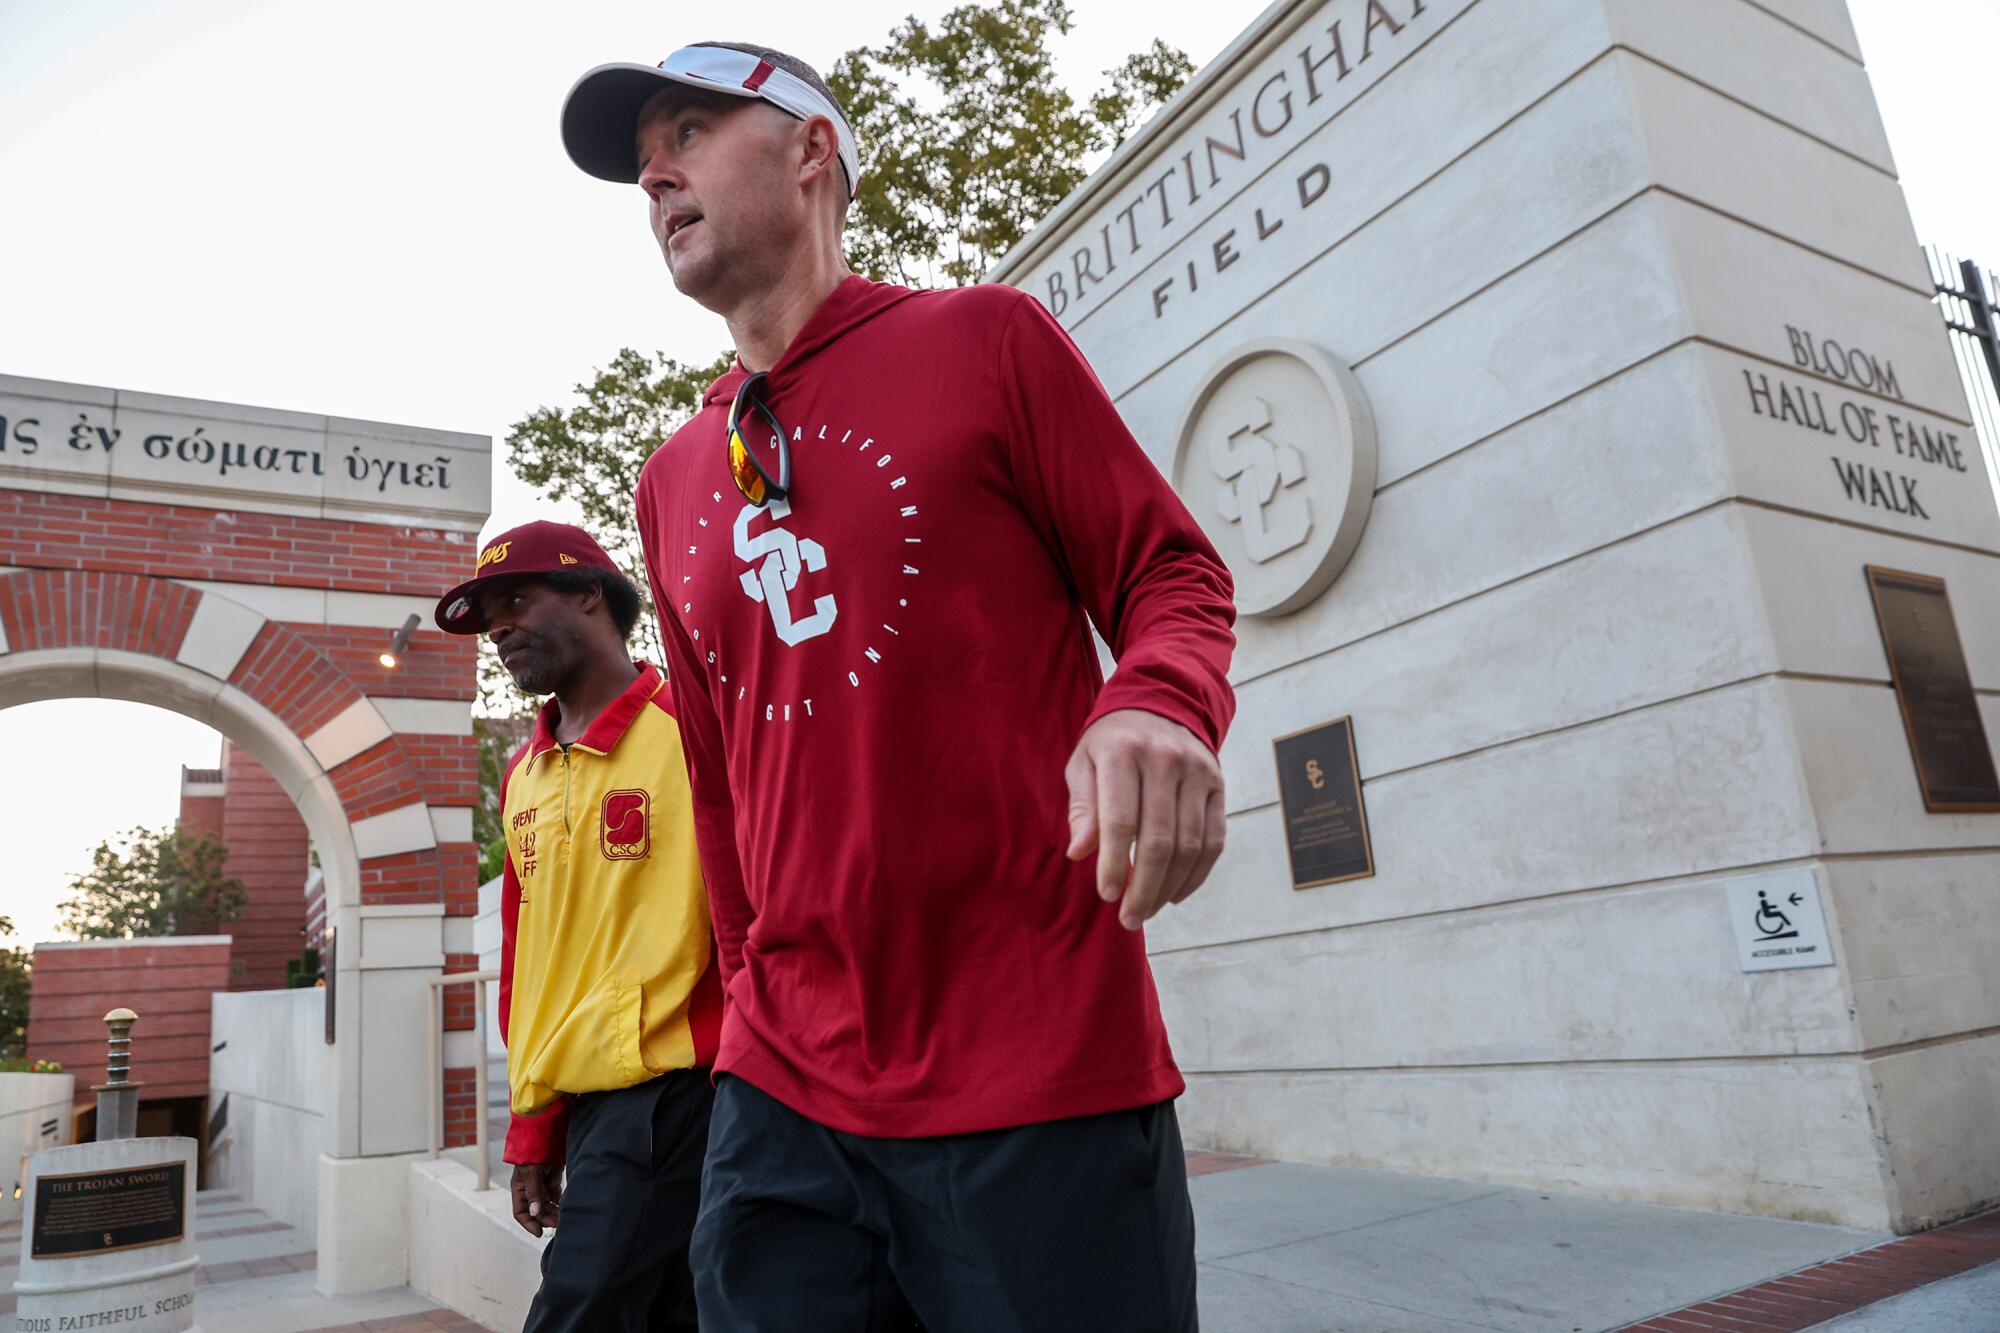 Lincoln Riley enters his second season as USC's coach with high expectations.